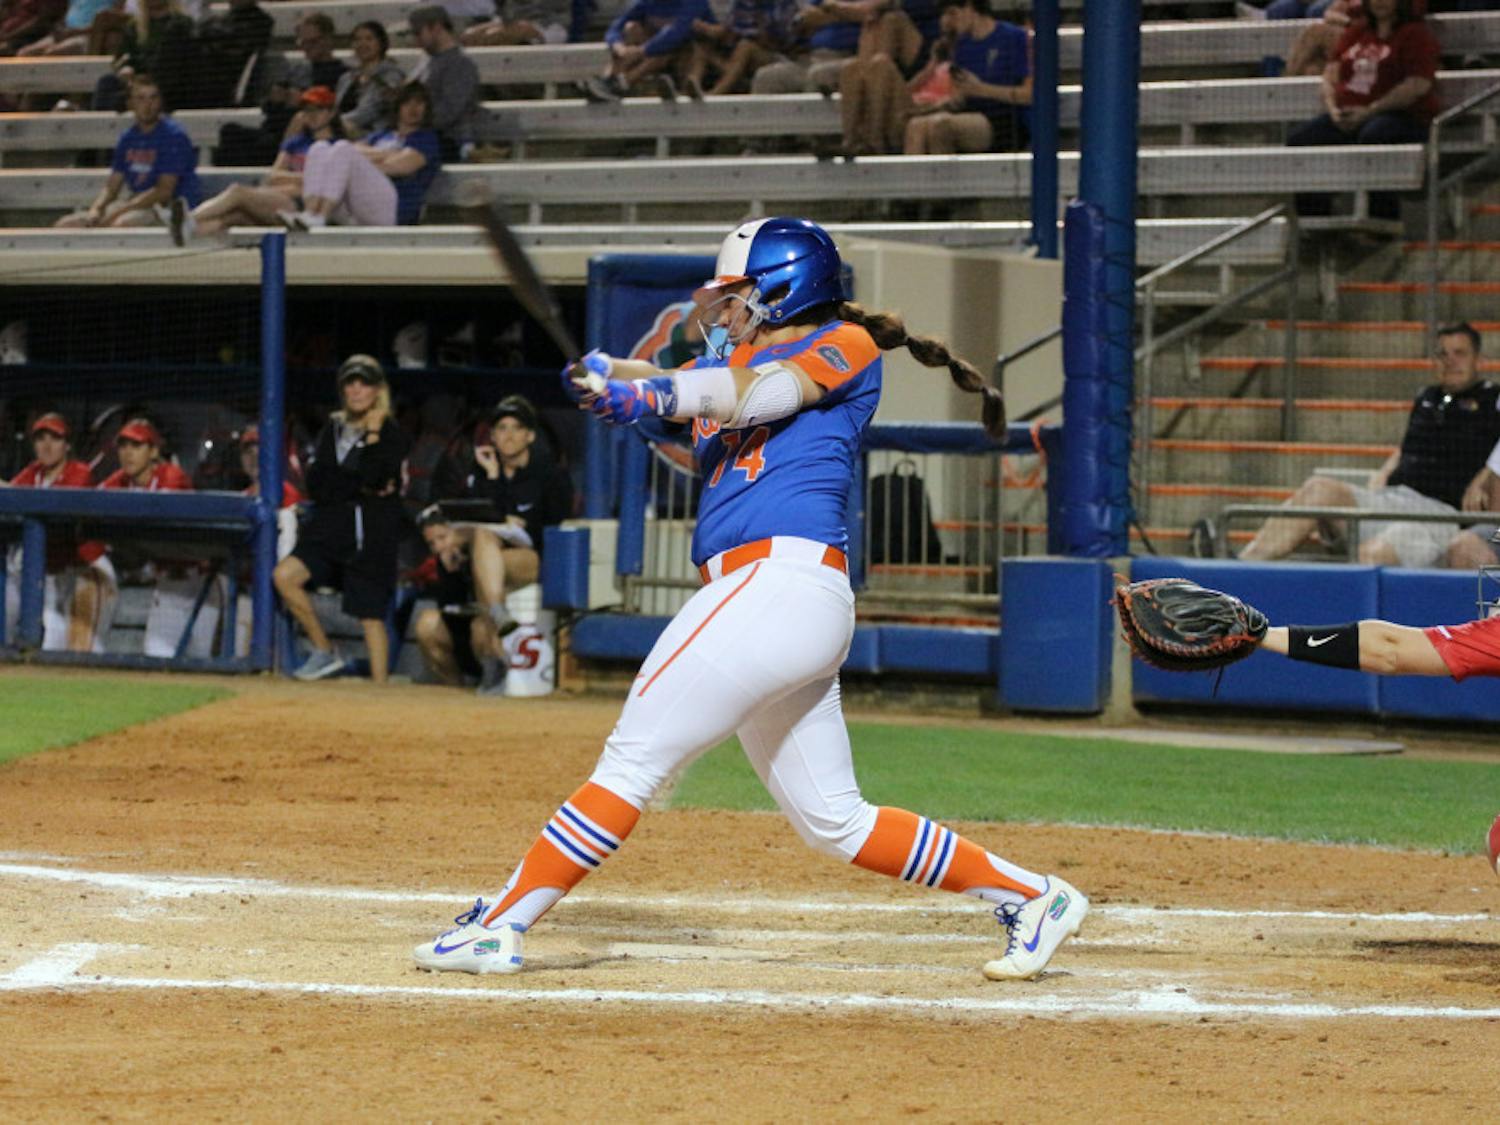 Shortstop Sophia Reynoso and the rest of the Gators' infield could have their hands full tonight against a speedy Georgia team. 